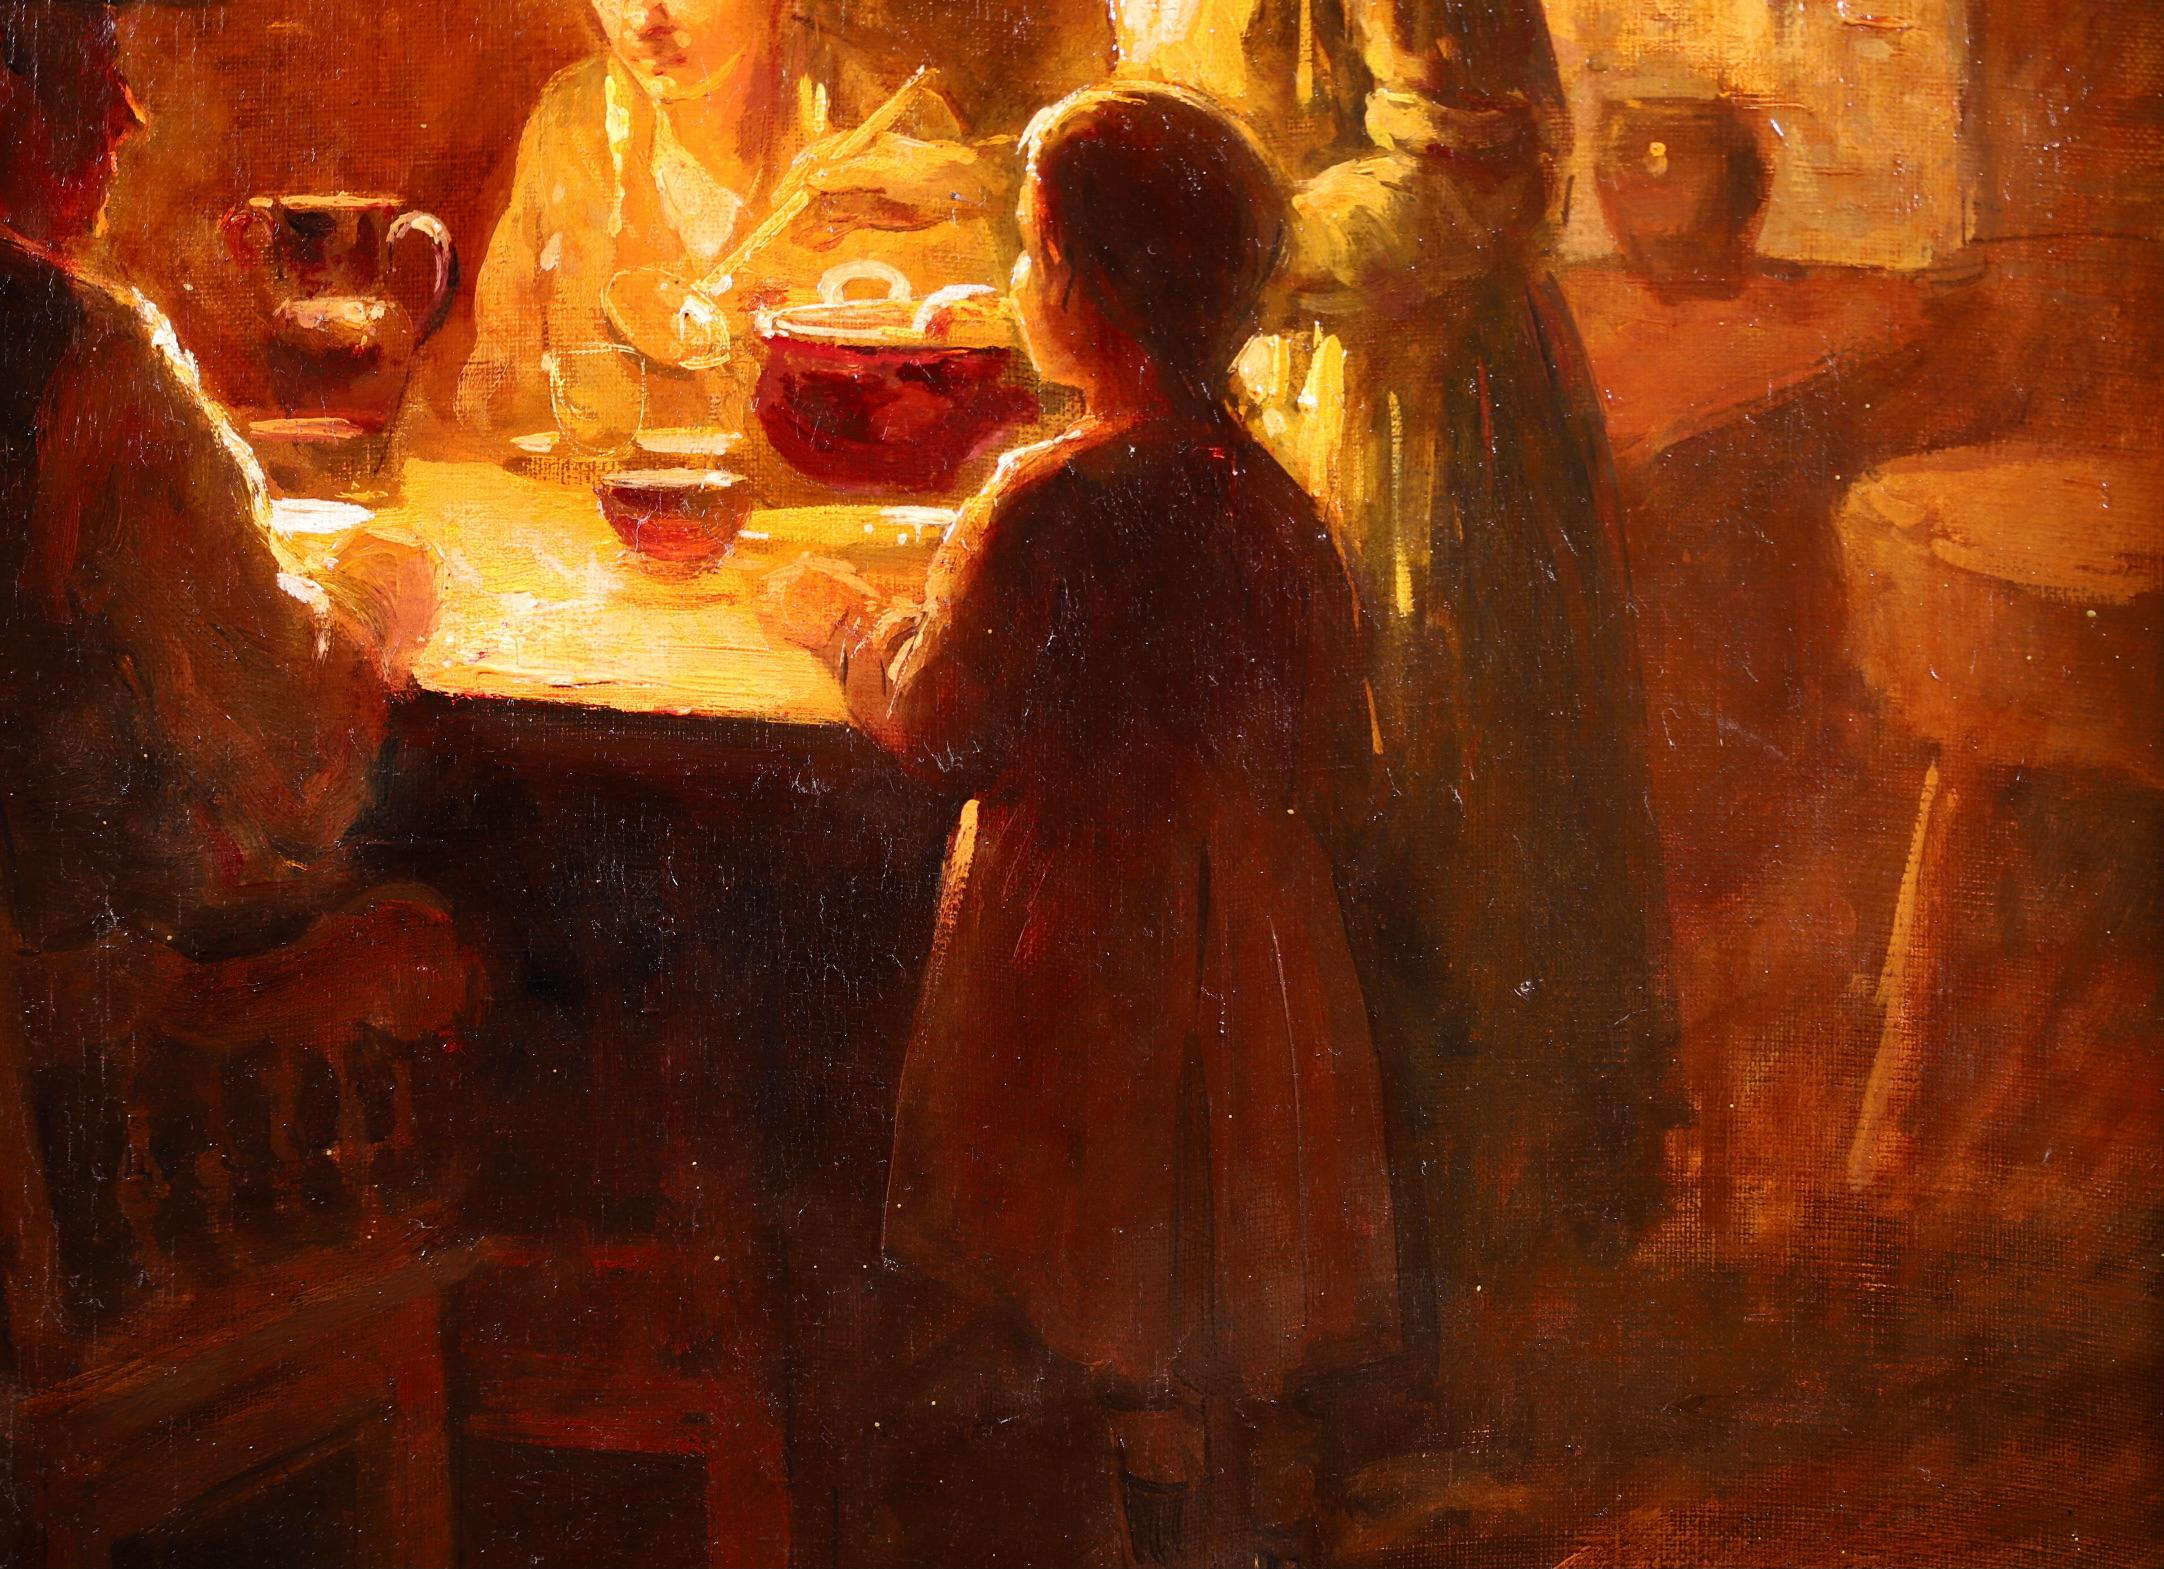 A charming and nostalgic oil on canvas circa 1910 by sought after French impressionist painter Edouard Leon Cortes. The work depicts a family enjoying dinner in a typical Breton kitchen scene. A man and lady are seated at the table while a woman